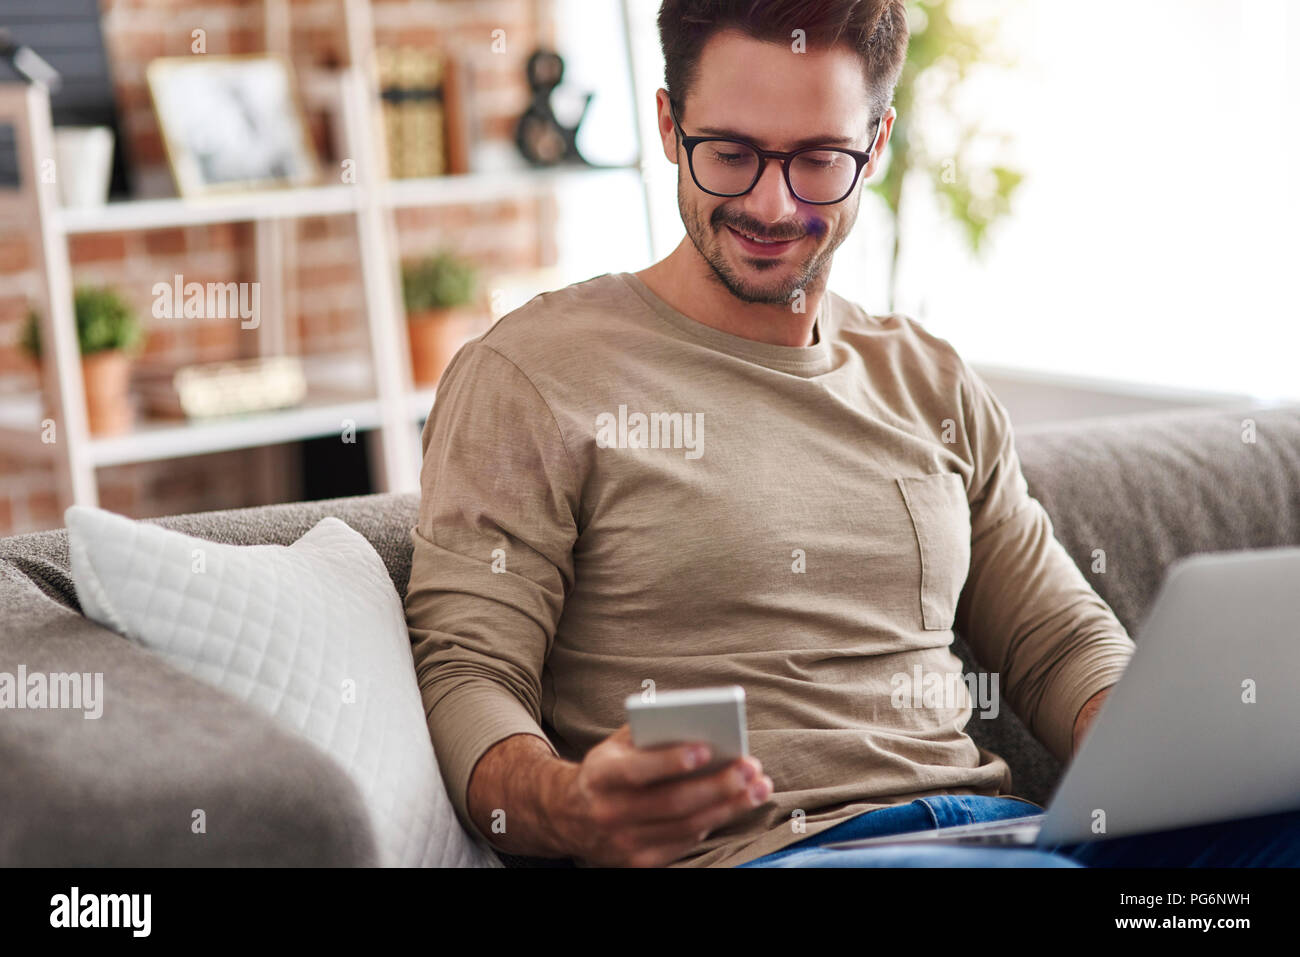 Smiling man sitting on couch at home using laptop and cell phone Stock Photo